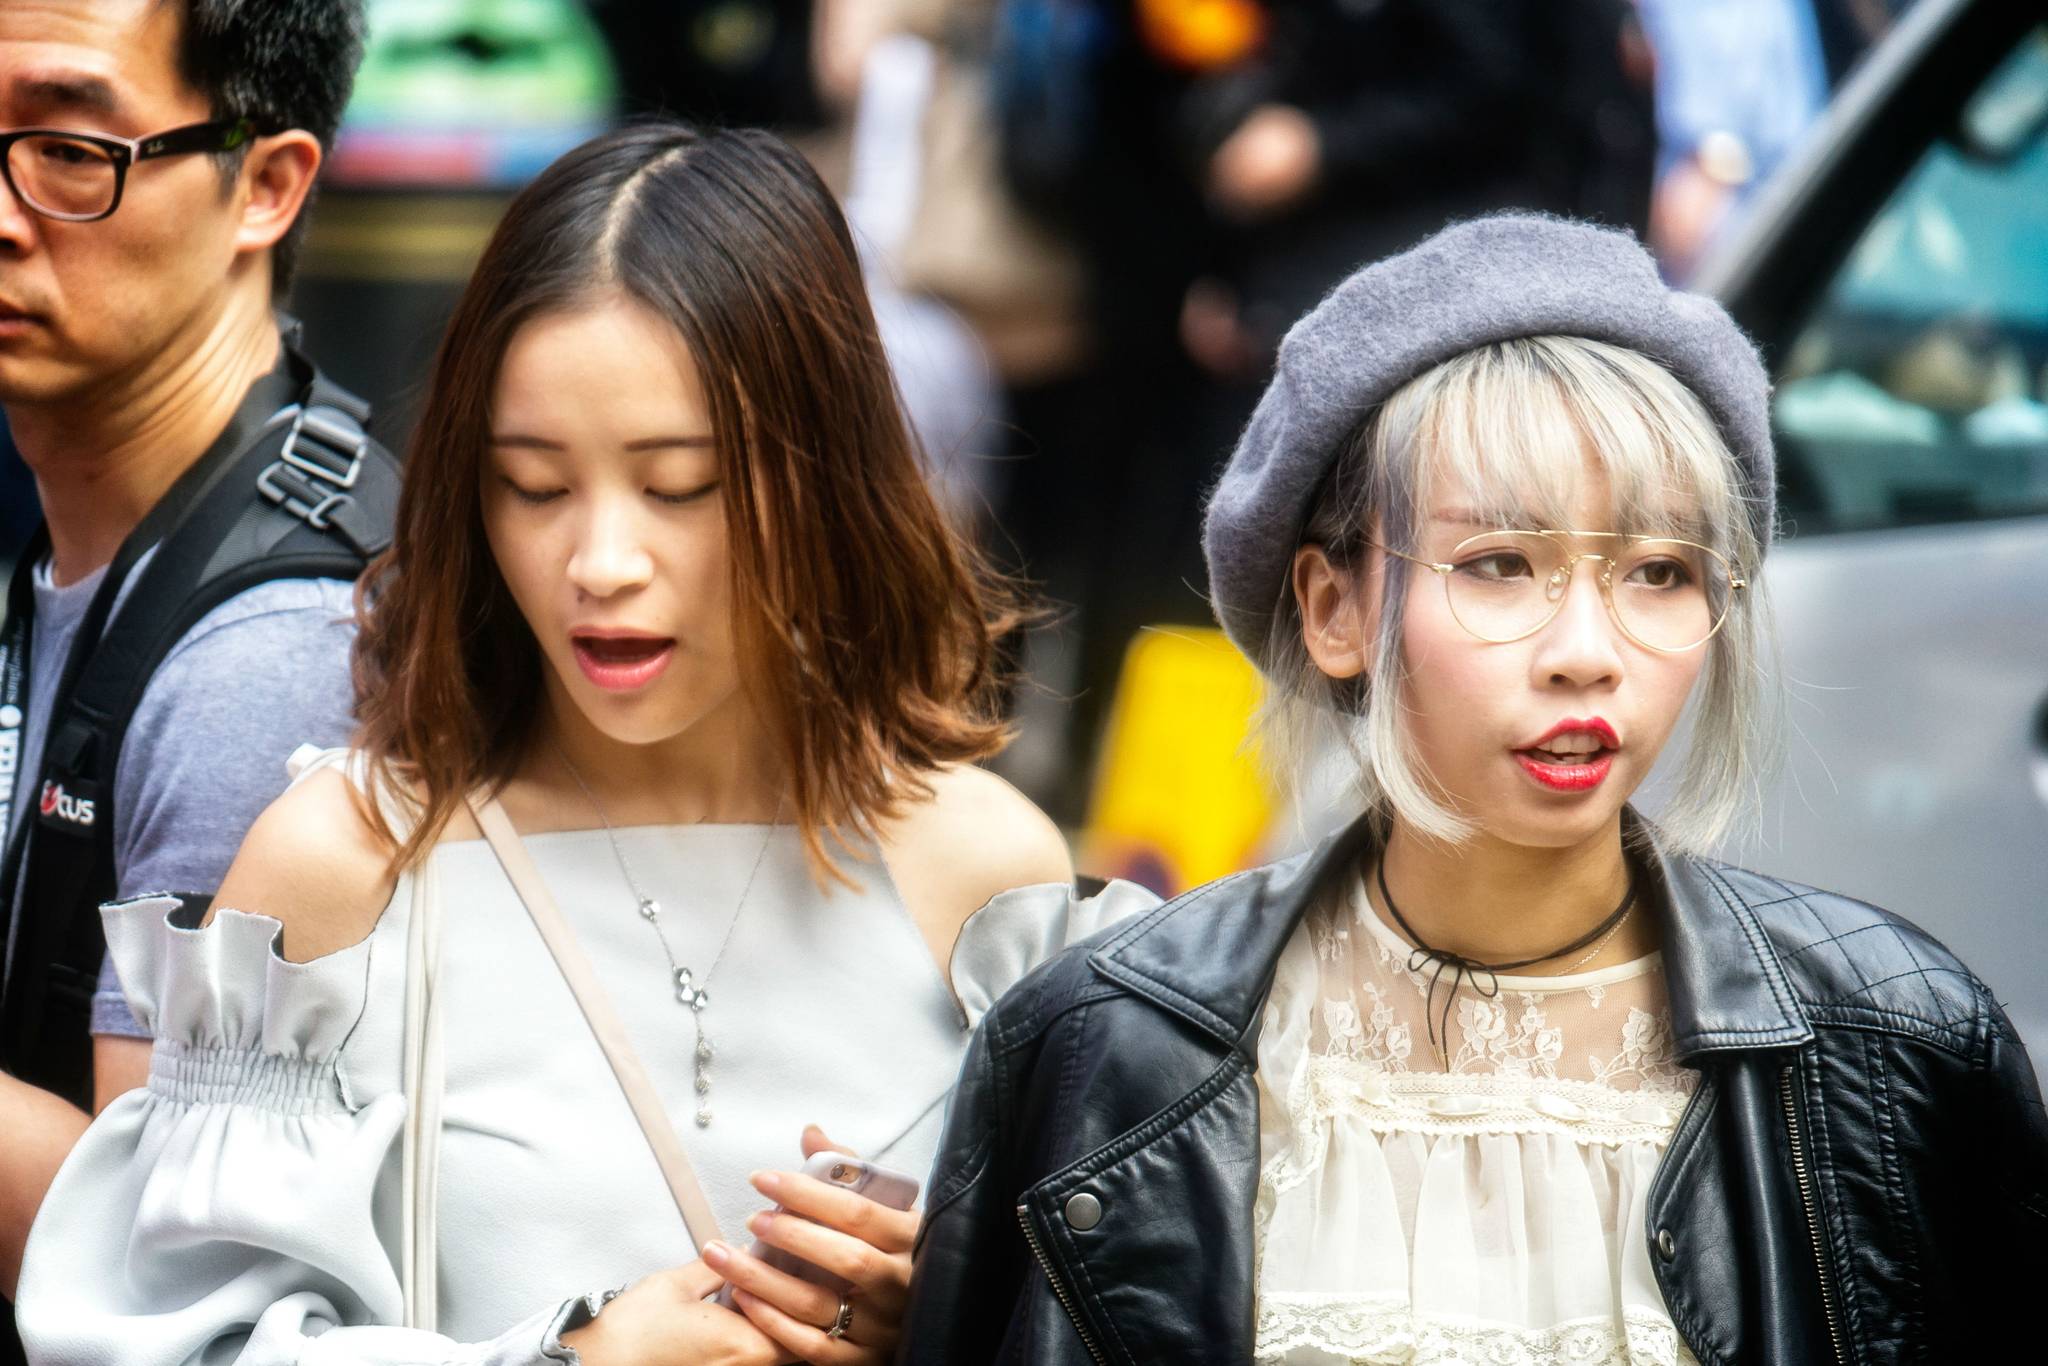 Word of mouth influences most female shoppers